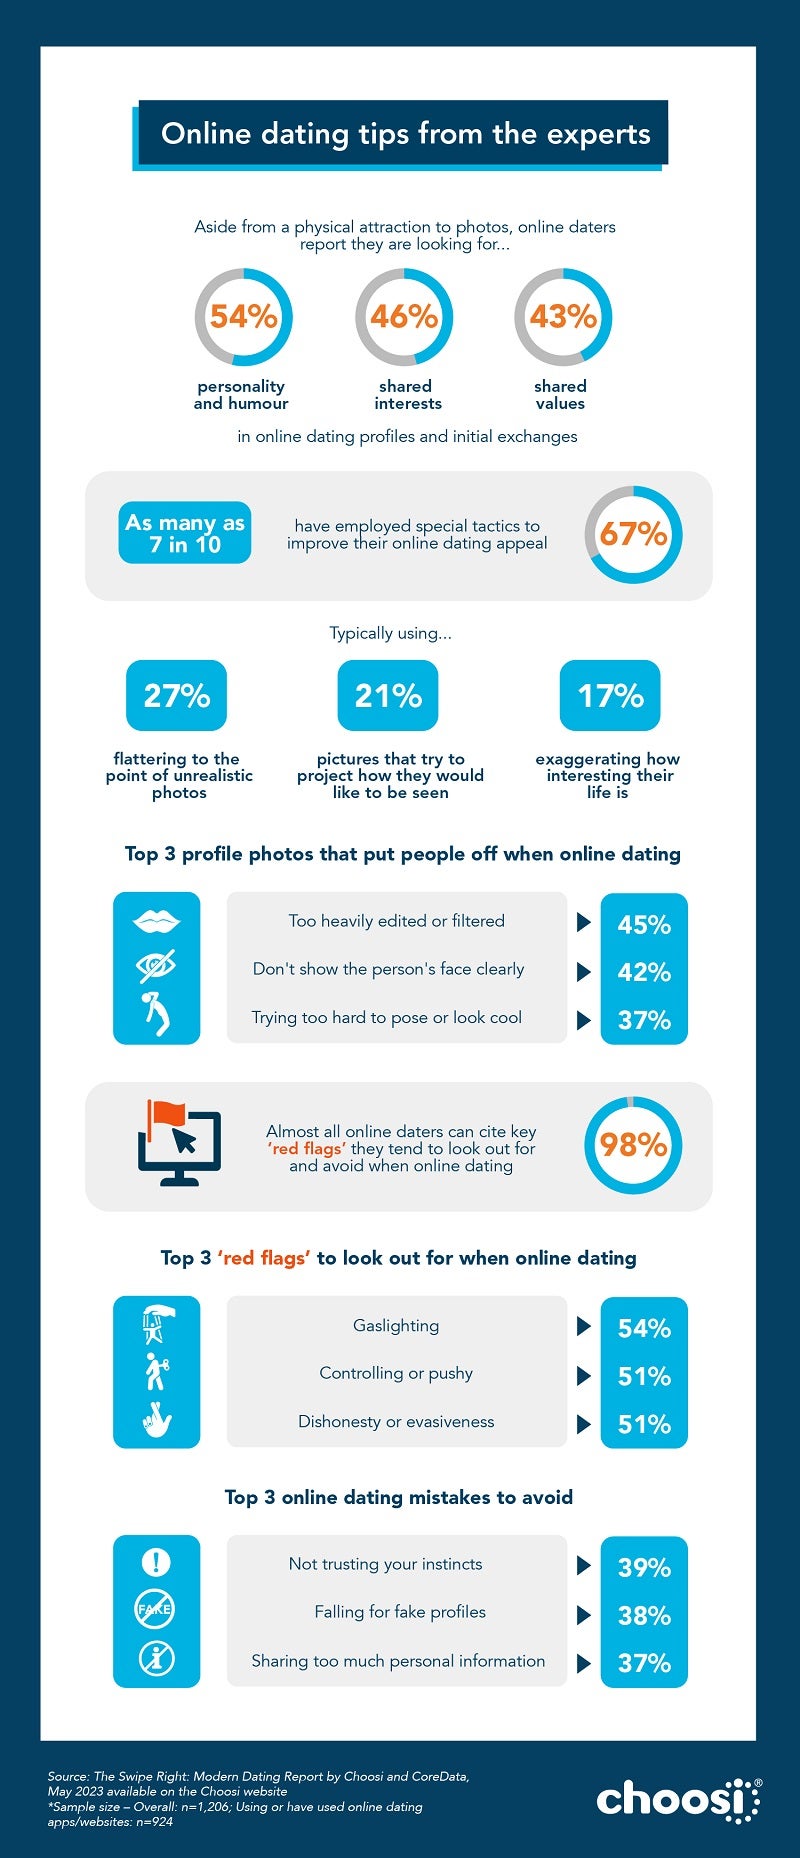 Infographic presenting expert tips and advice for successful online dating